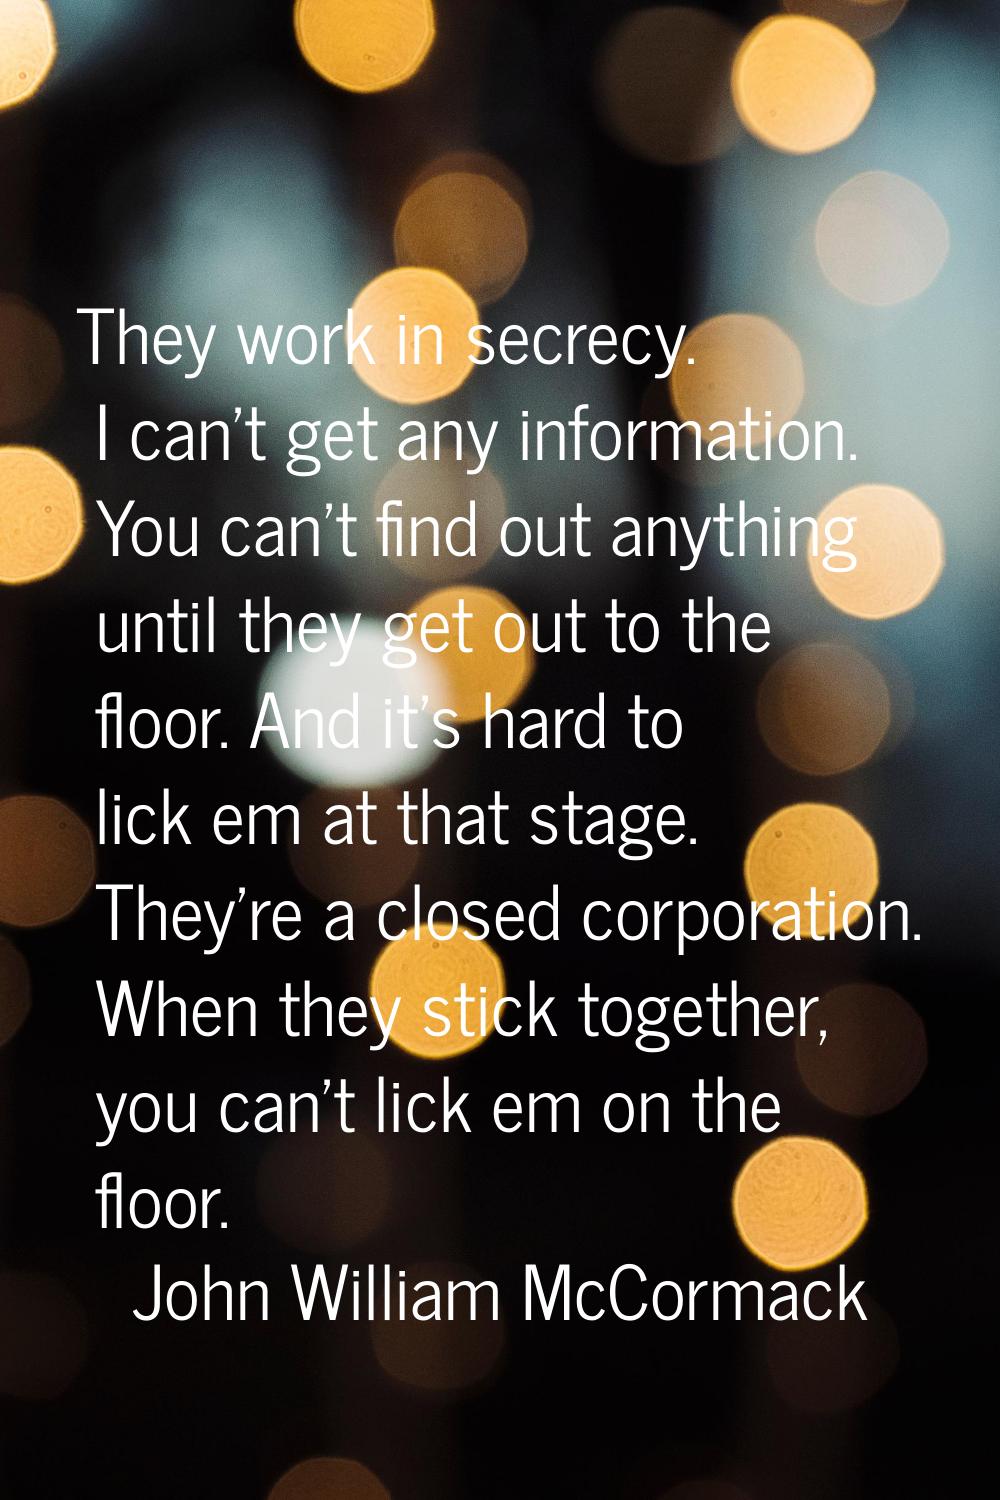 They work in secrecy. I can't get any information. You can't find out anything until they get out t